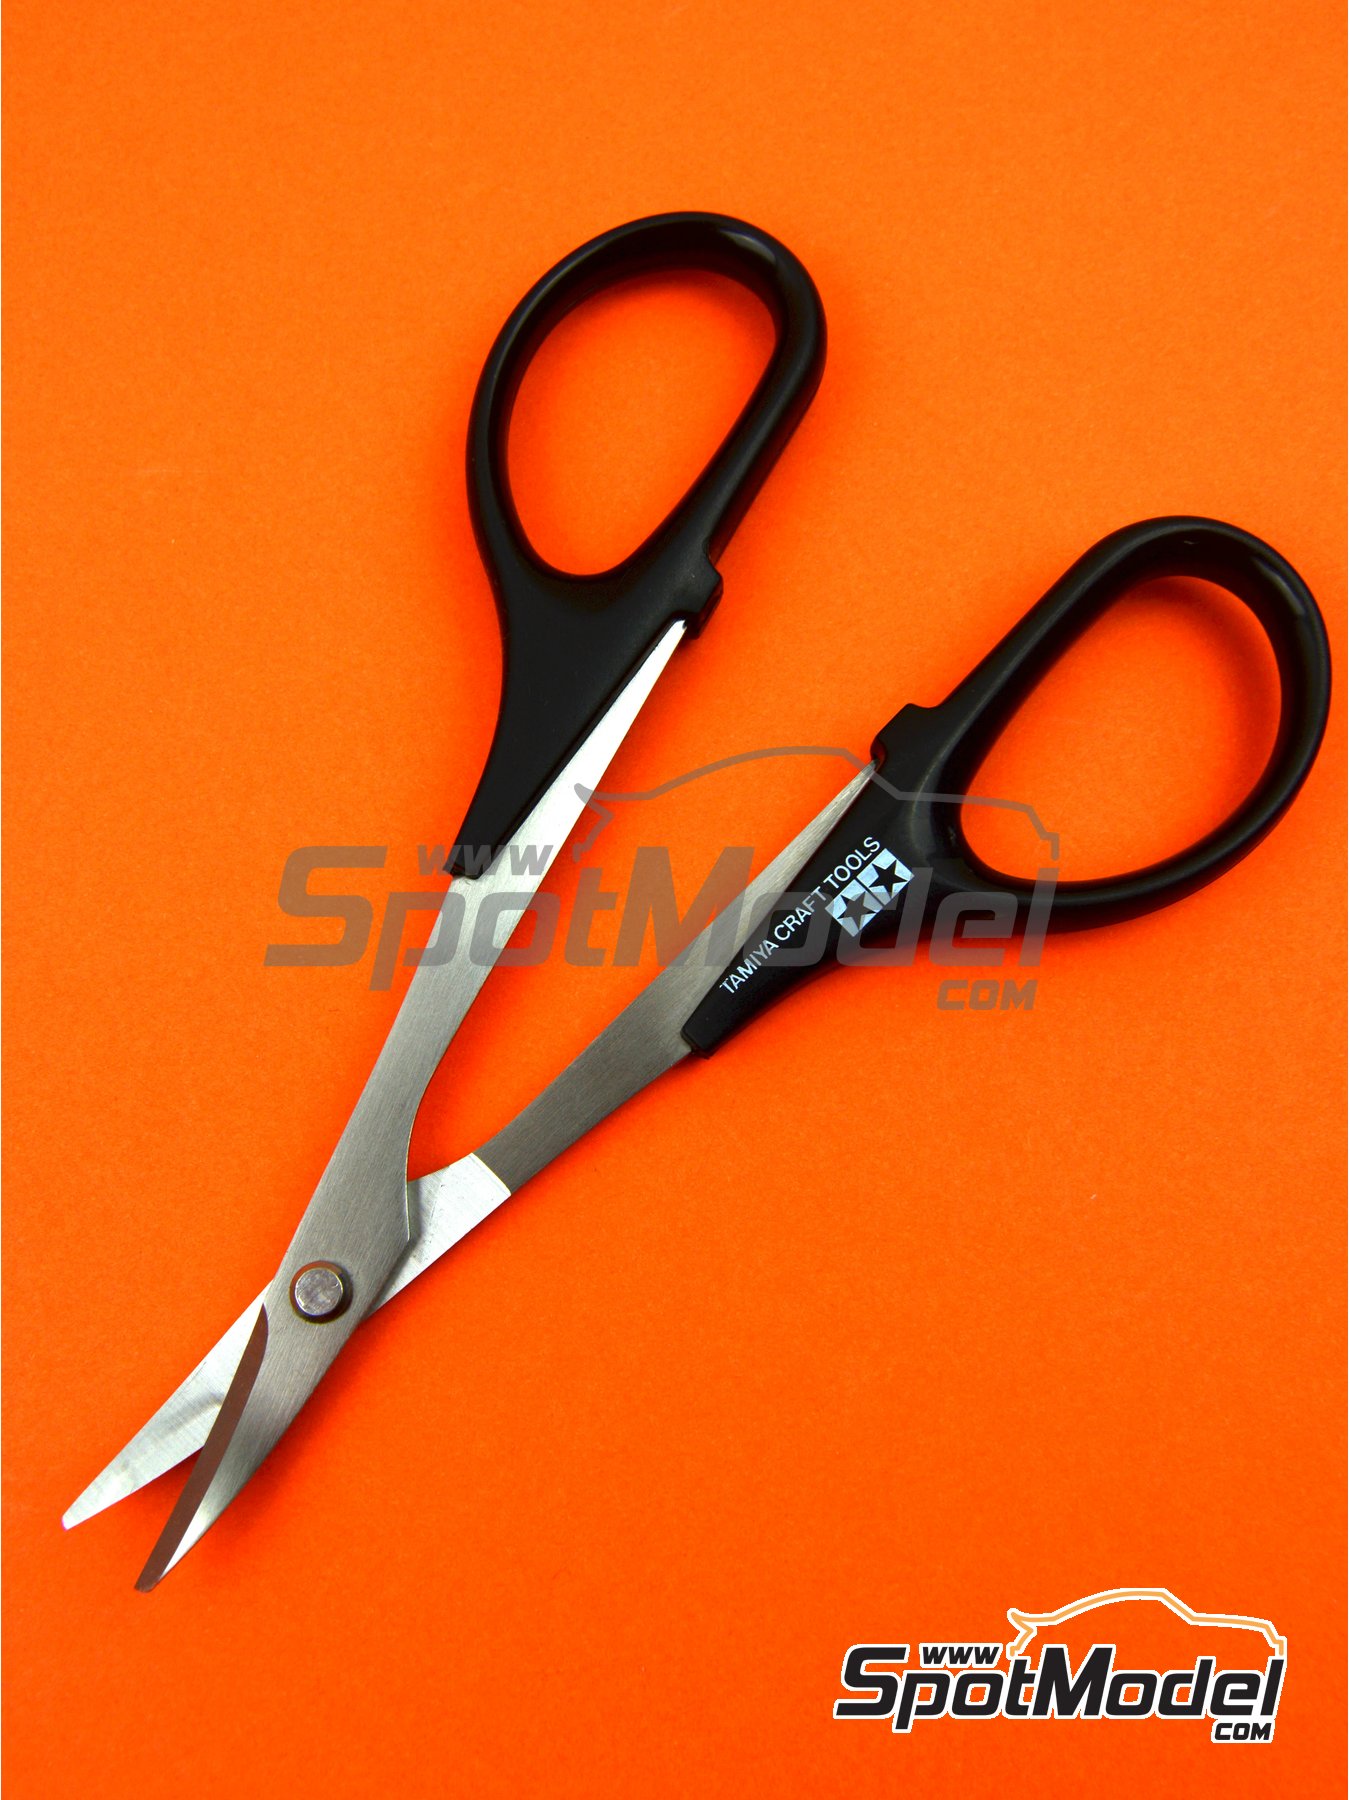 74005 Tamiya Curved Scissors Tools Model Building for sale online 